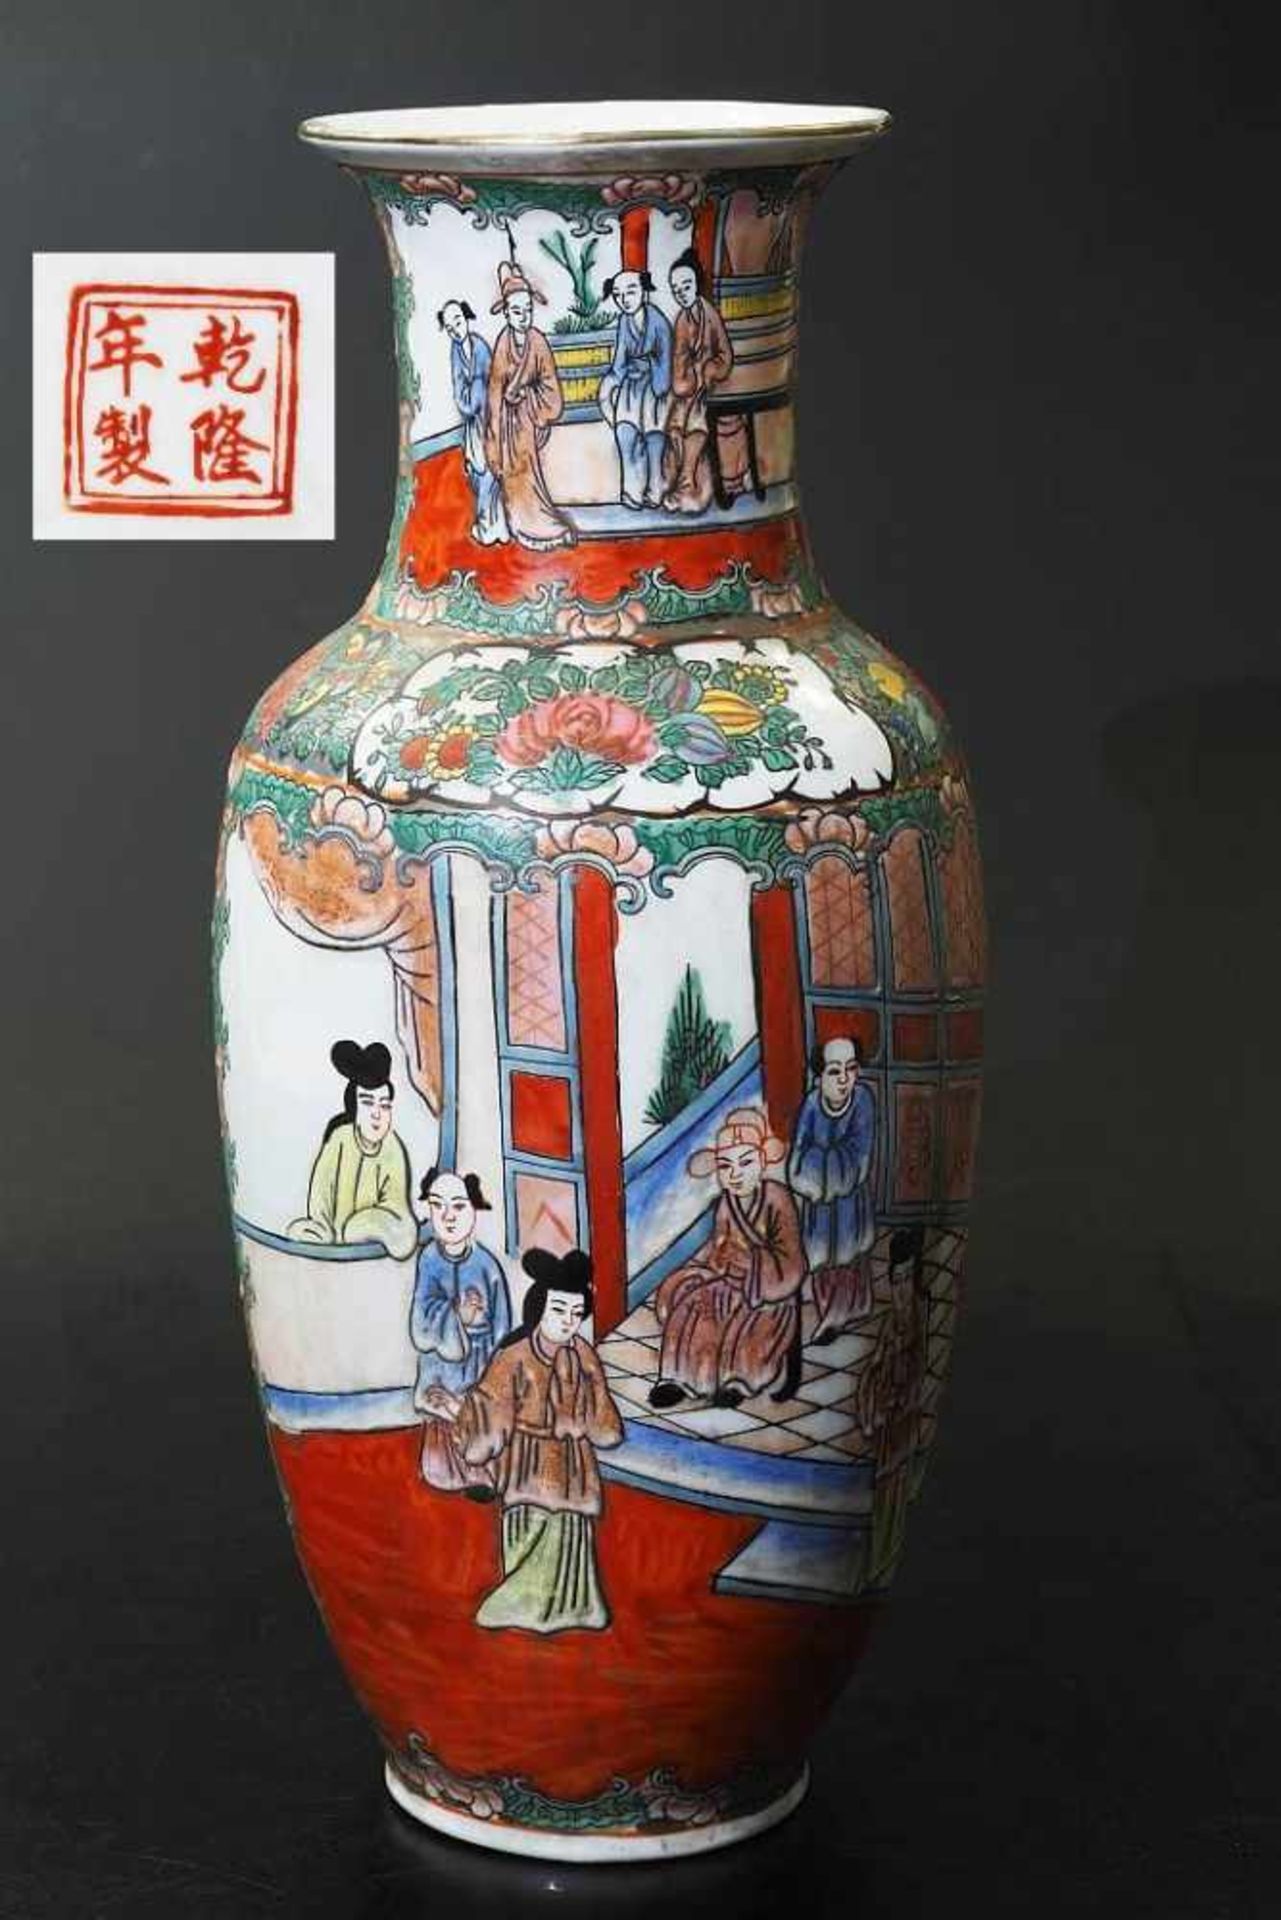 China Vase Periode Ching Dynasty 1862 - 1875. China Vase Periode Ching Dynasty 1862 - 1875.